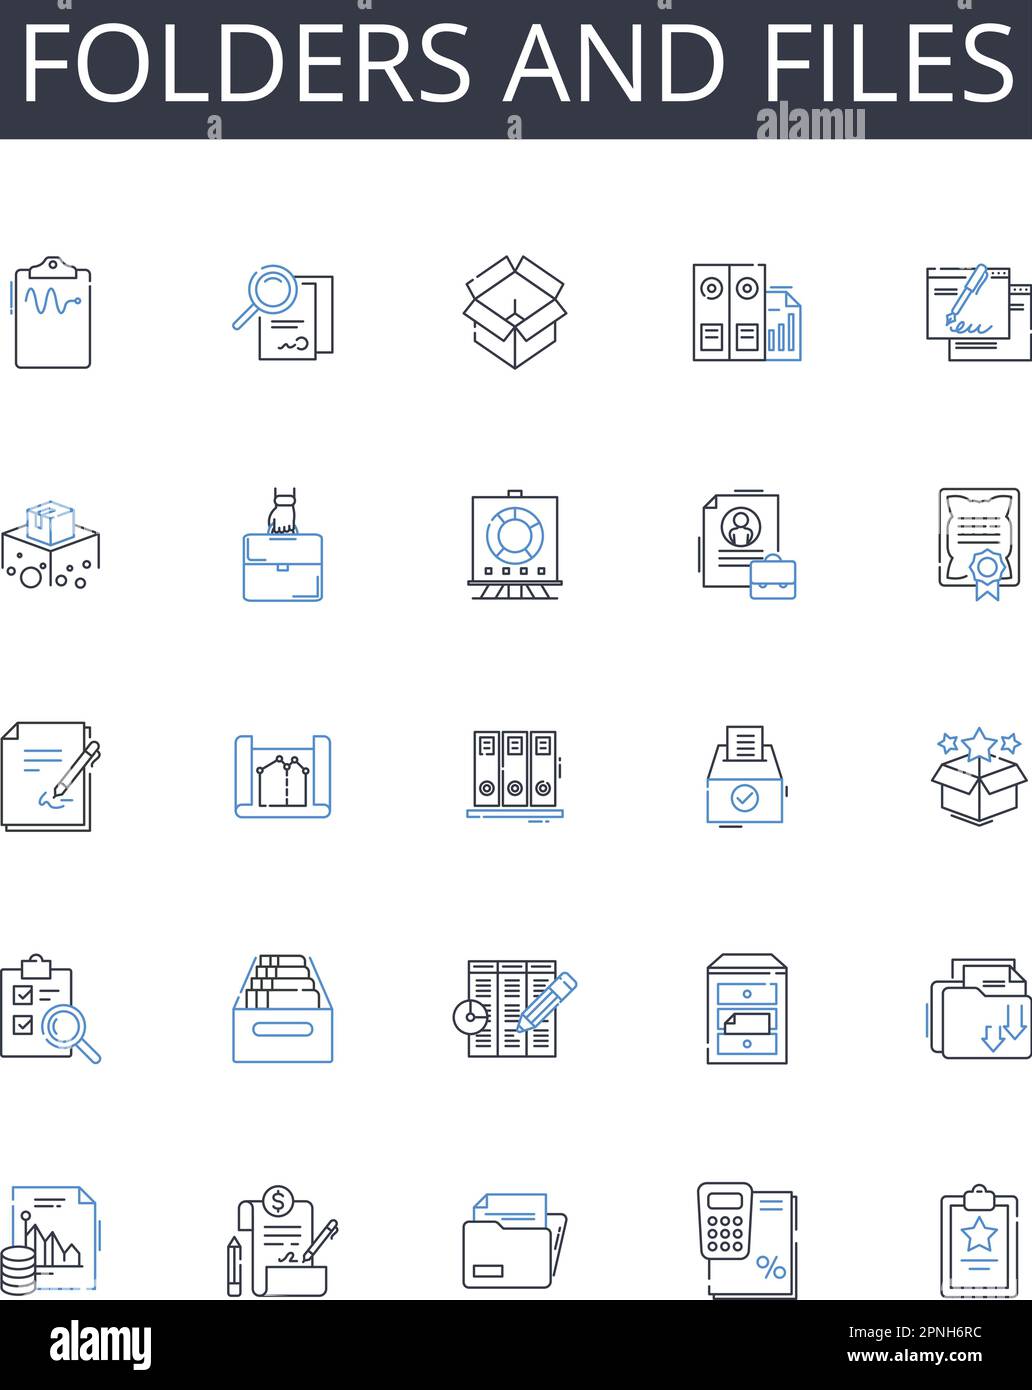 Folders and files line icons collection. SMS, QR Codes, Location-based, Apps, Responsive, Targeted, Engagement vector and linear illustration. Push Stock Vector